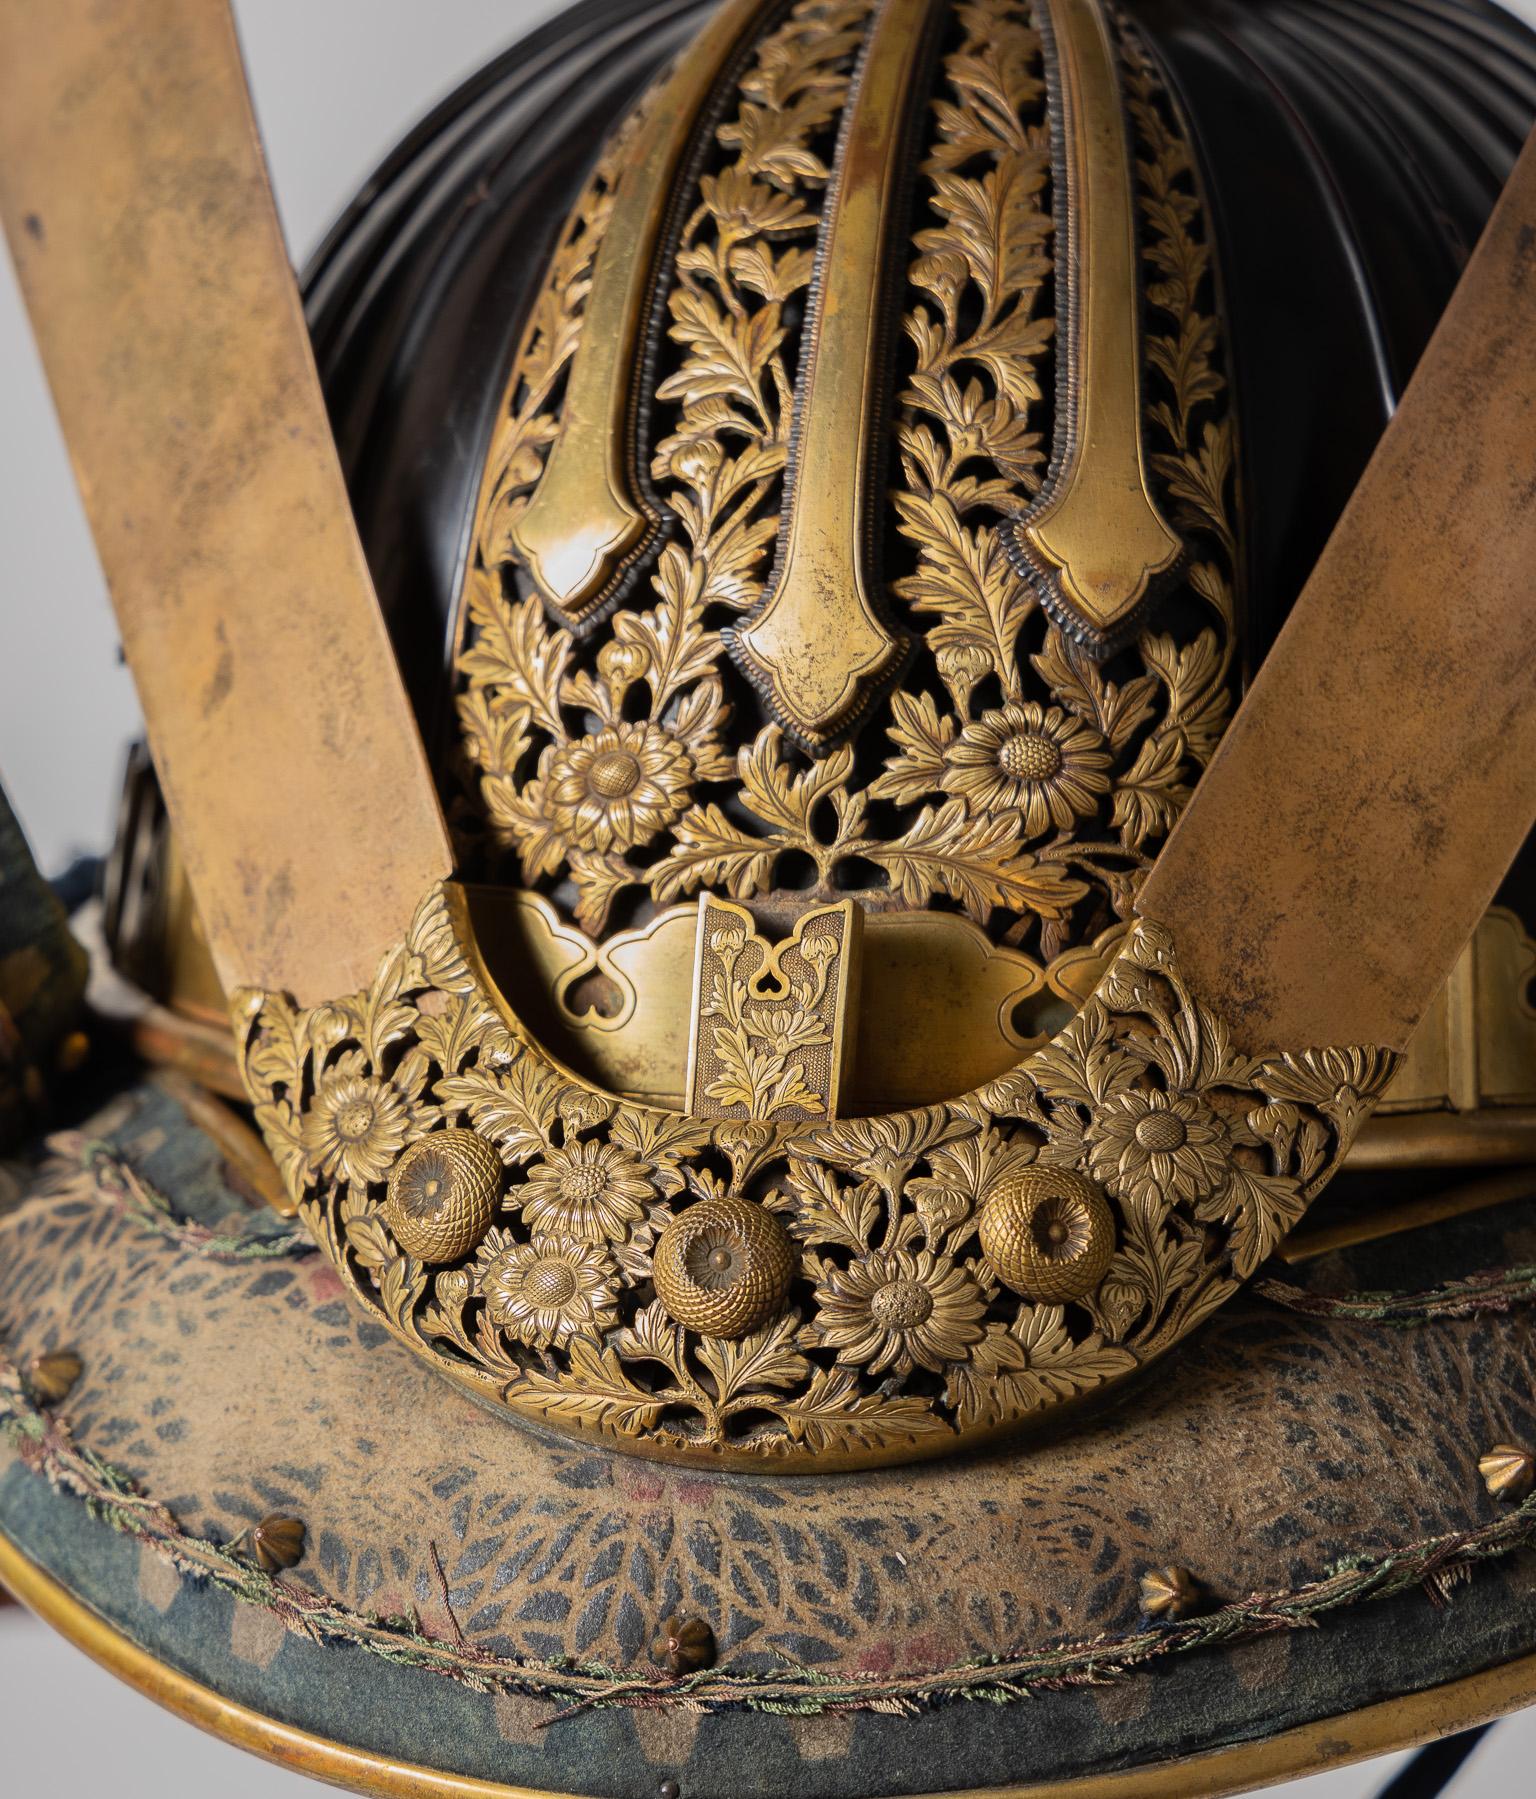 Nerikawa kabuto
Lacquered leather samurai helmet 

Late Edo period 

Signed: Tsuda Kiyotake kore o sei (??????) and dated 1861 

 

The helmet designs popular during the Muromachi period made a strong comeback in the second half of the Edo